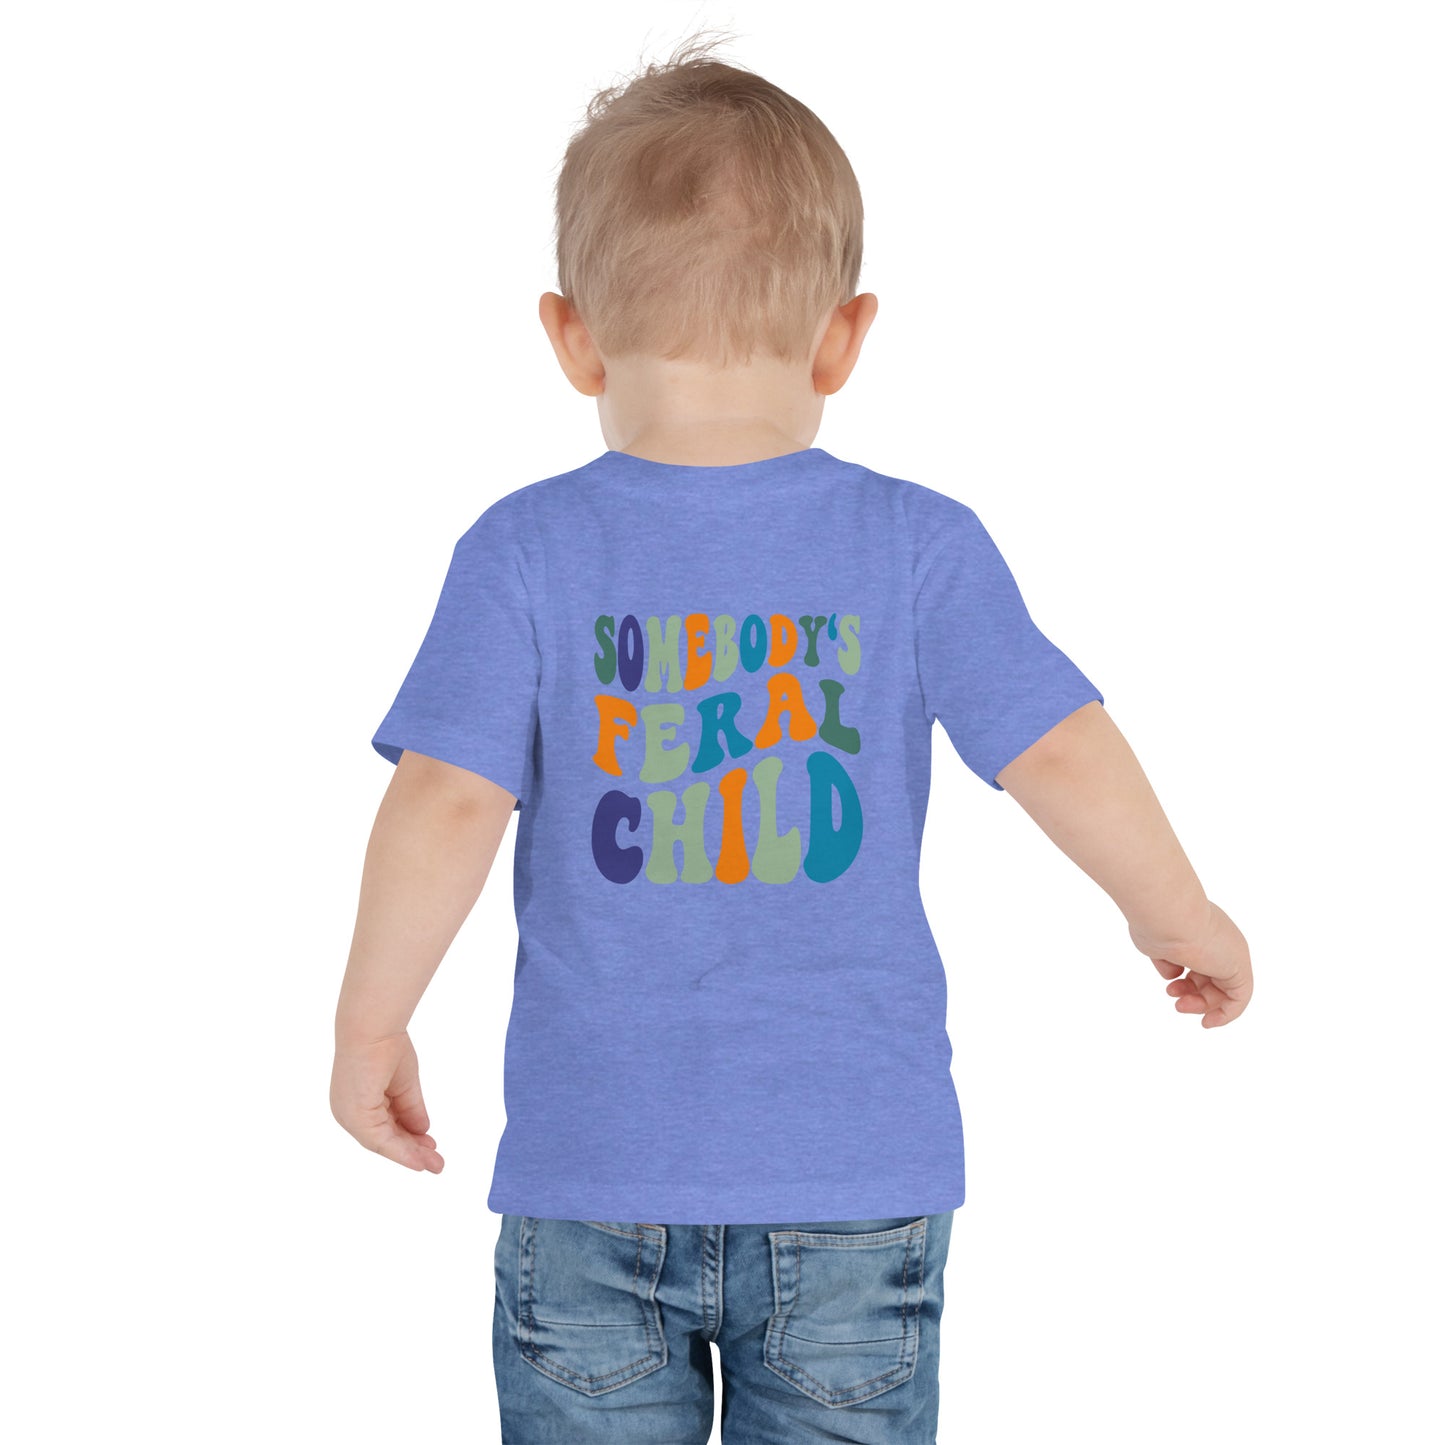 Feral Child (blue colorway) Toddler T-Shirt